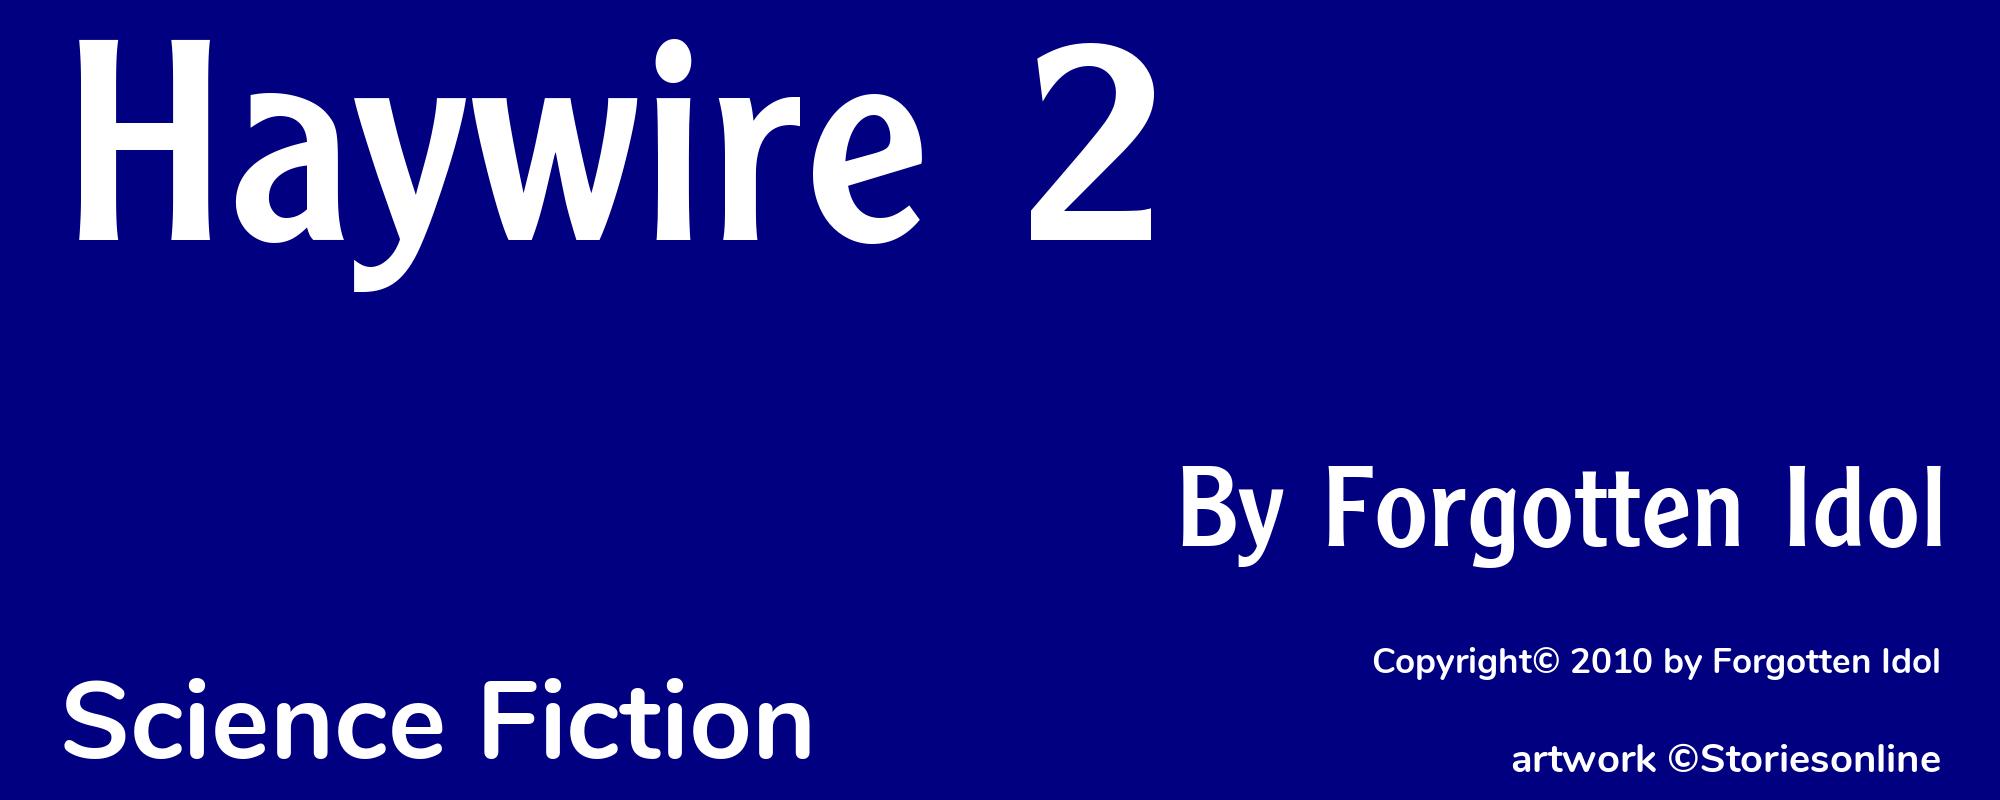 Haywire 2 - Cover